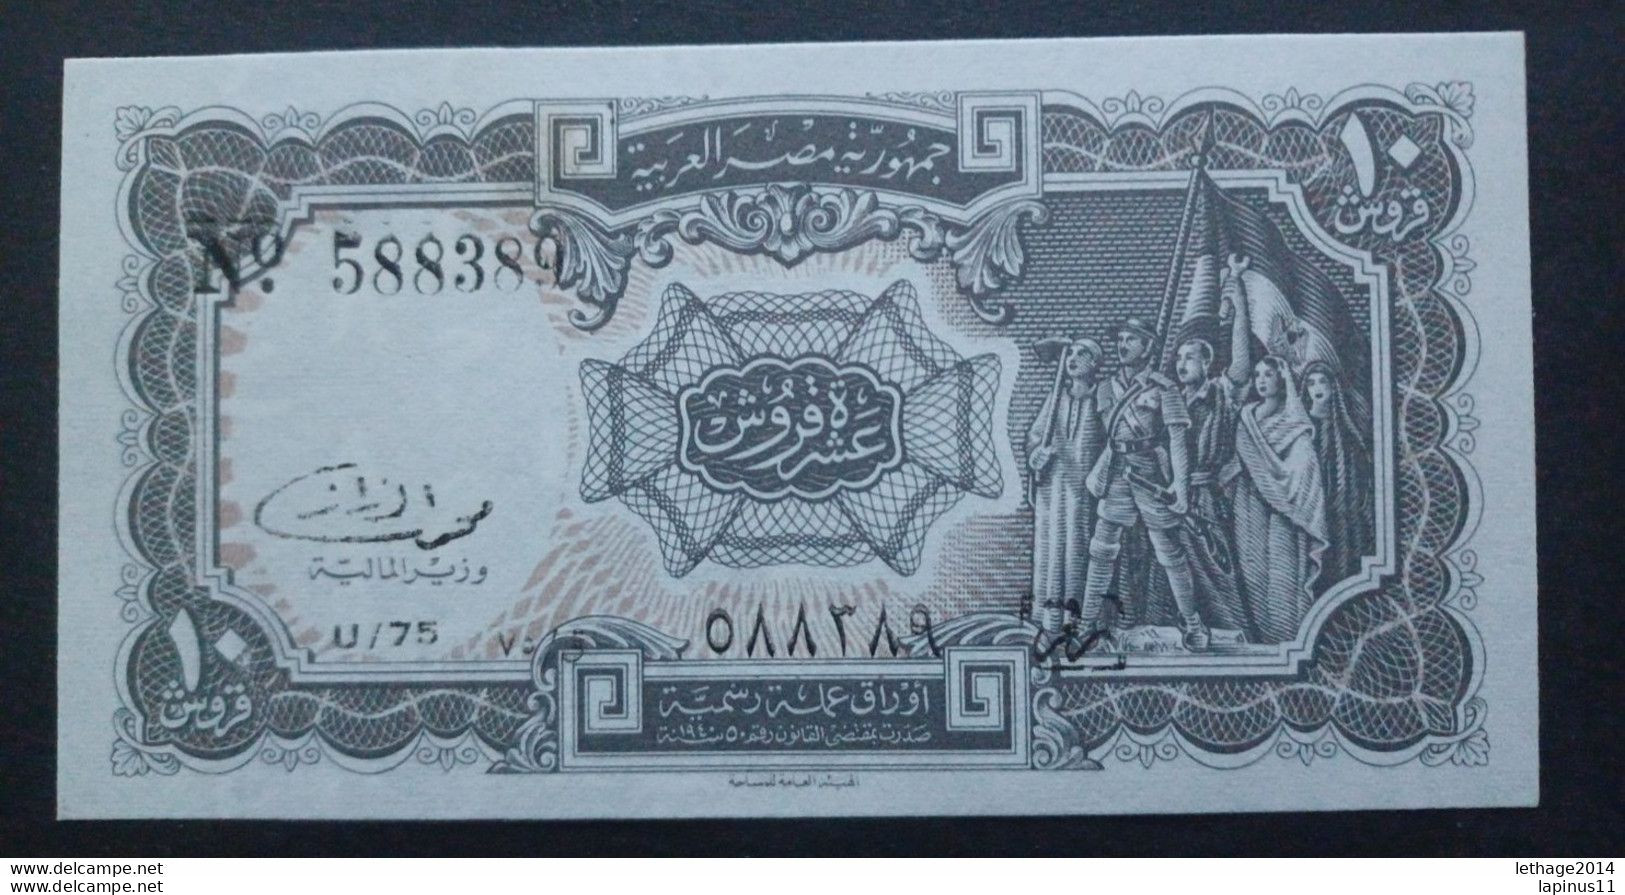 BANKNOTE EGYPT مصر EGYPT 10 PIASTRES 1952 UNCIRCULATED ERROR PRINT - Aegypten